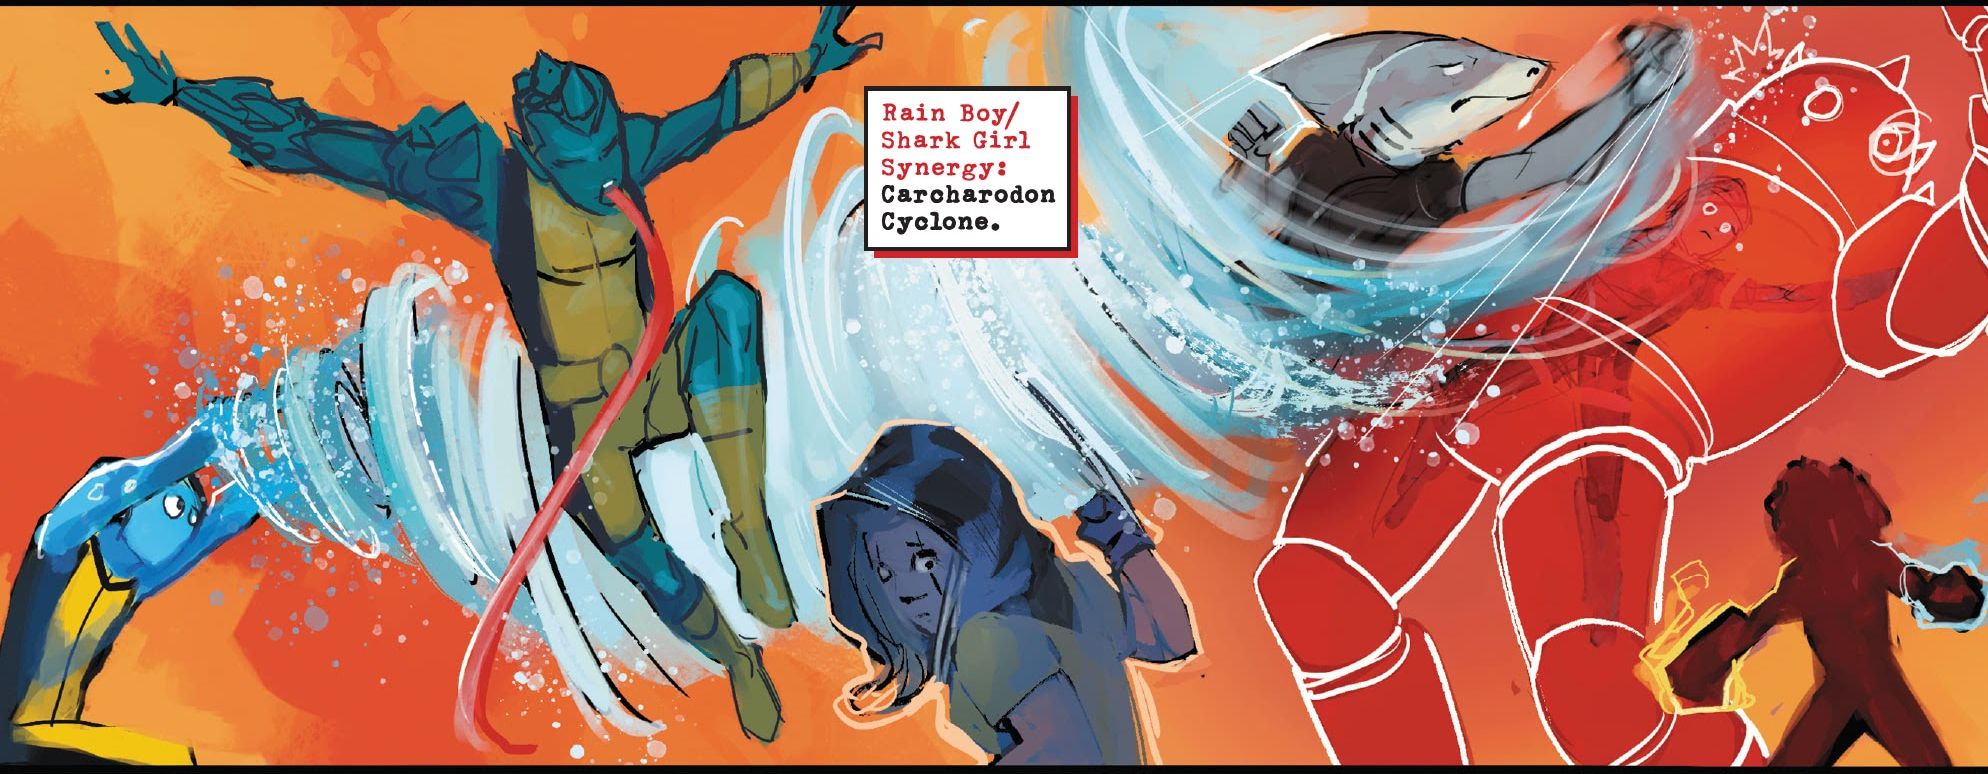 The X-Men Are Ripping Off Sharknado in the Coolest Way